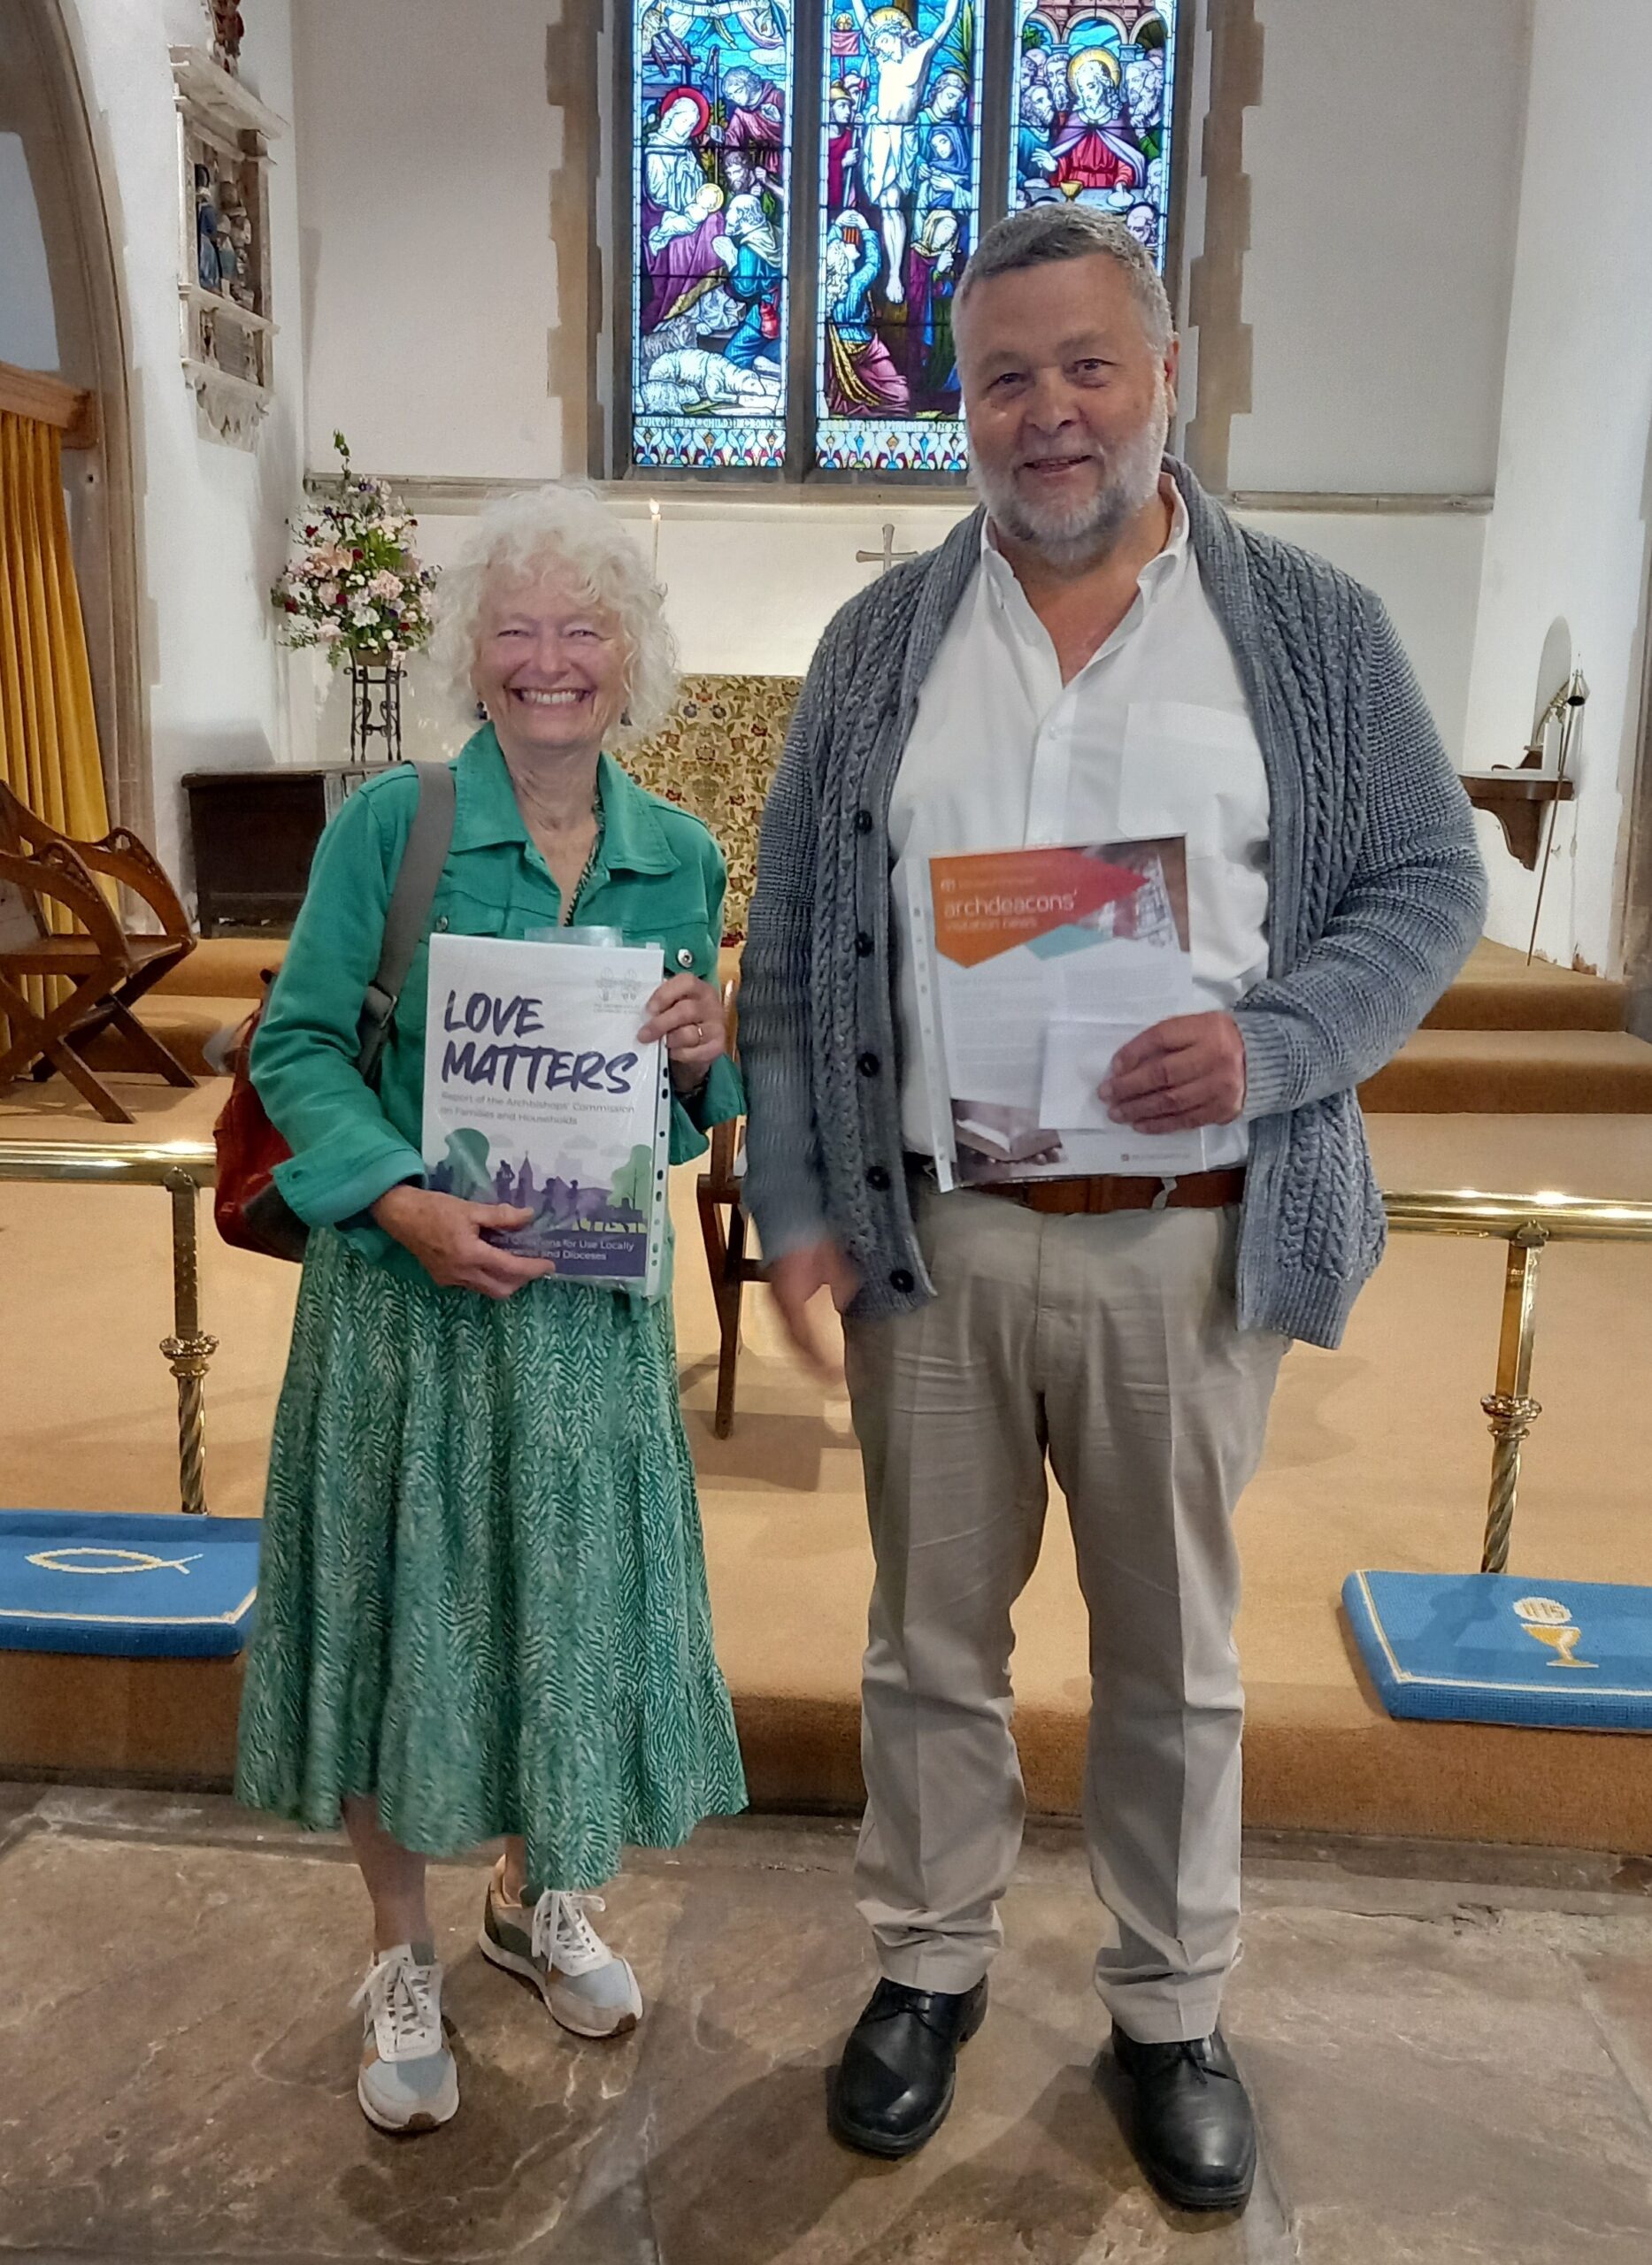 Archdeaconry of Horsham Visitation with Admission of Churchwardens